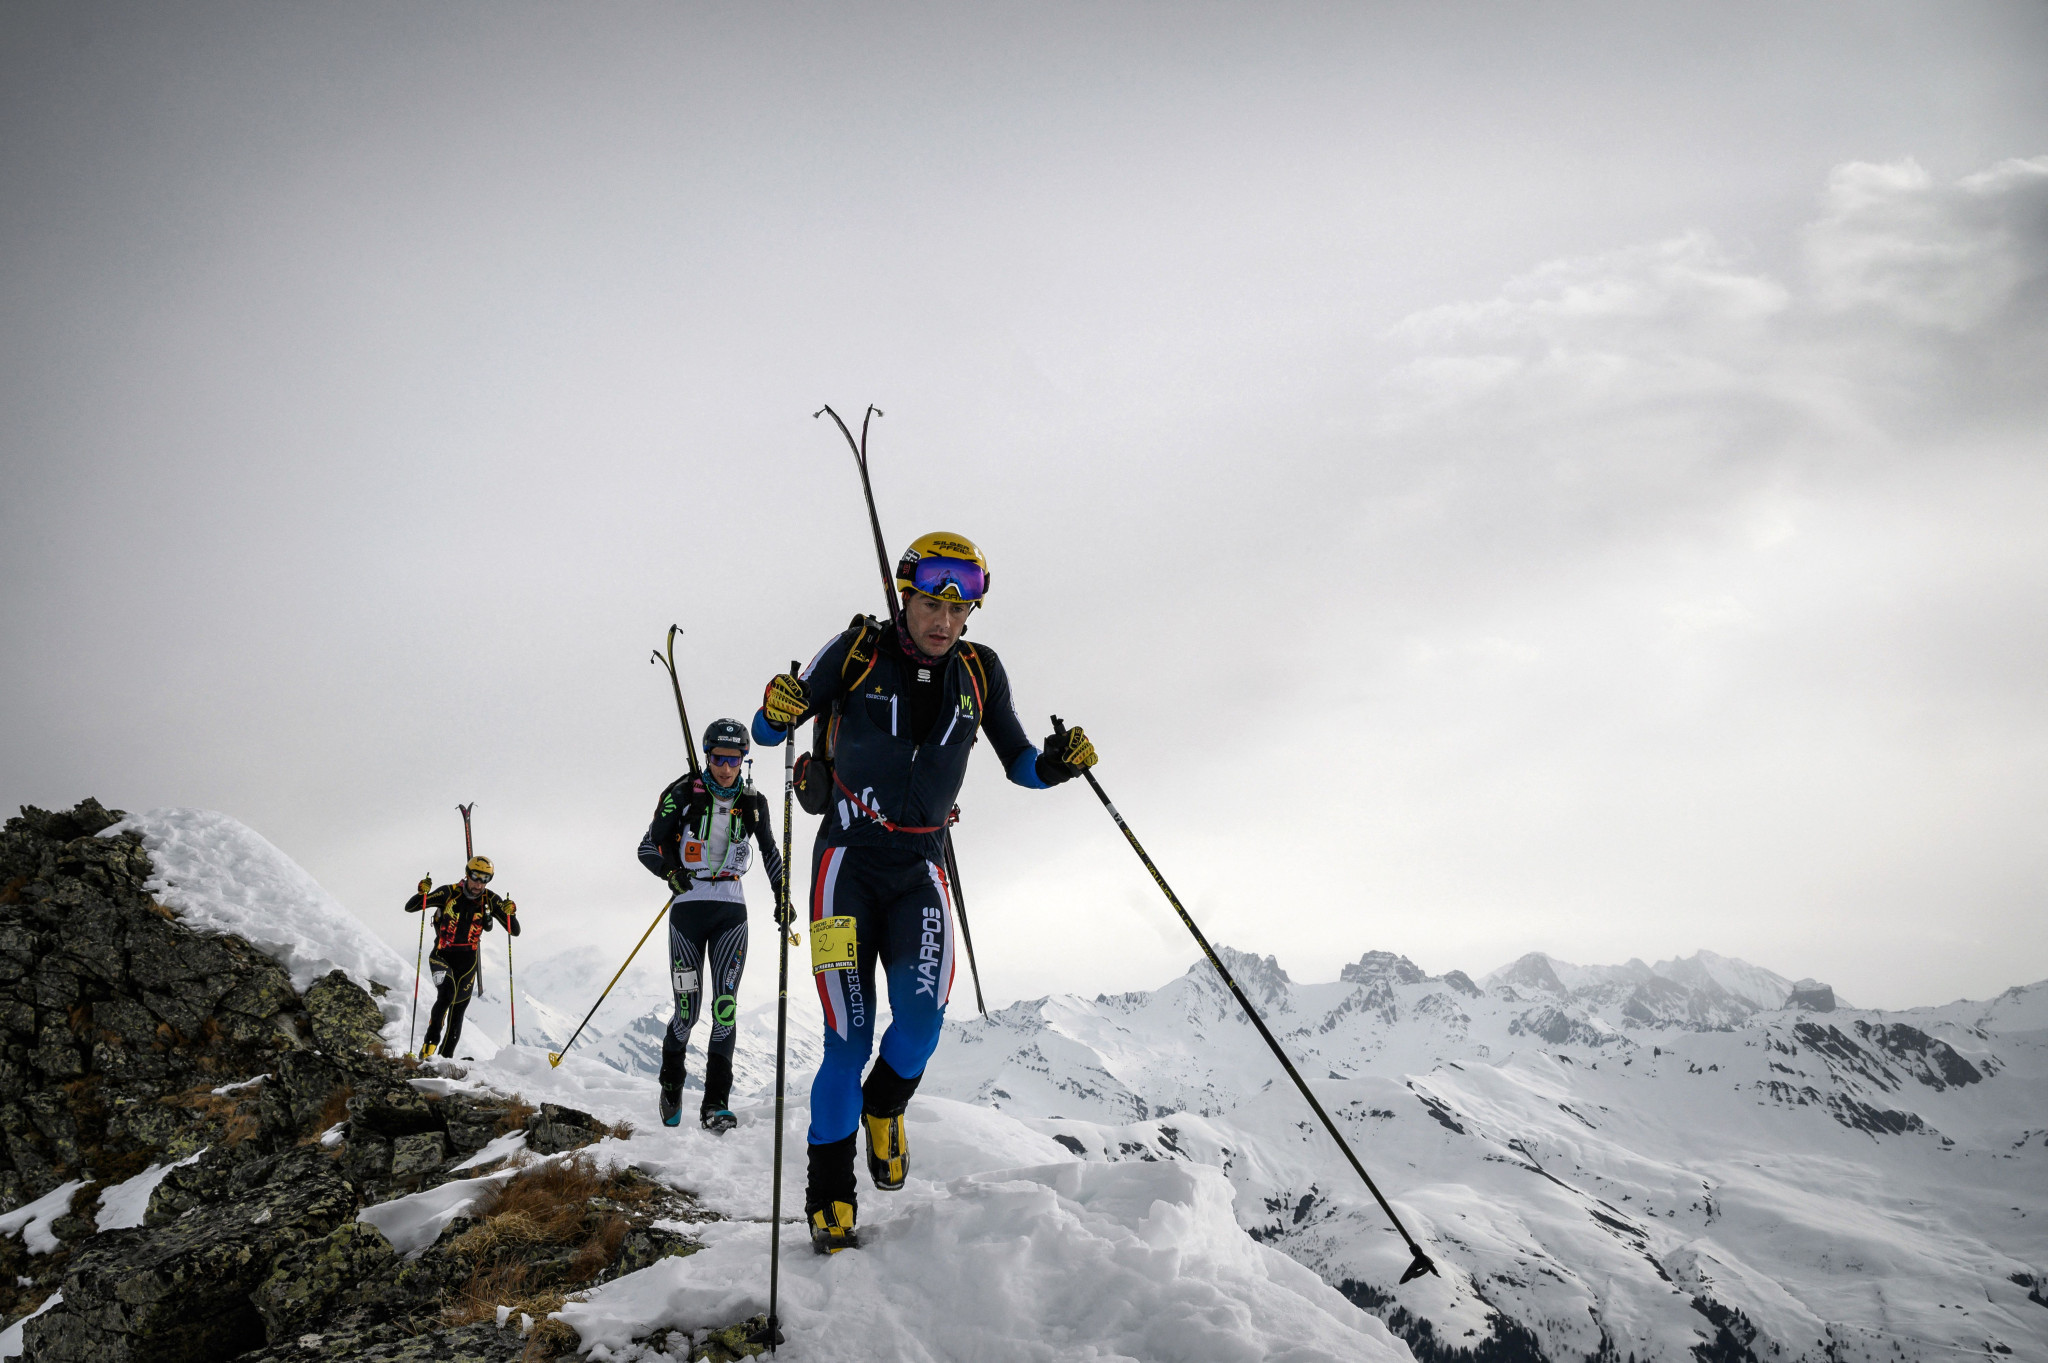 Ski mountaineering is due to make its Olympic debut at Milan Cortina 2026 ©Getty Images